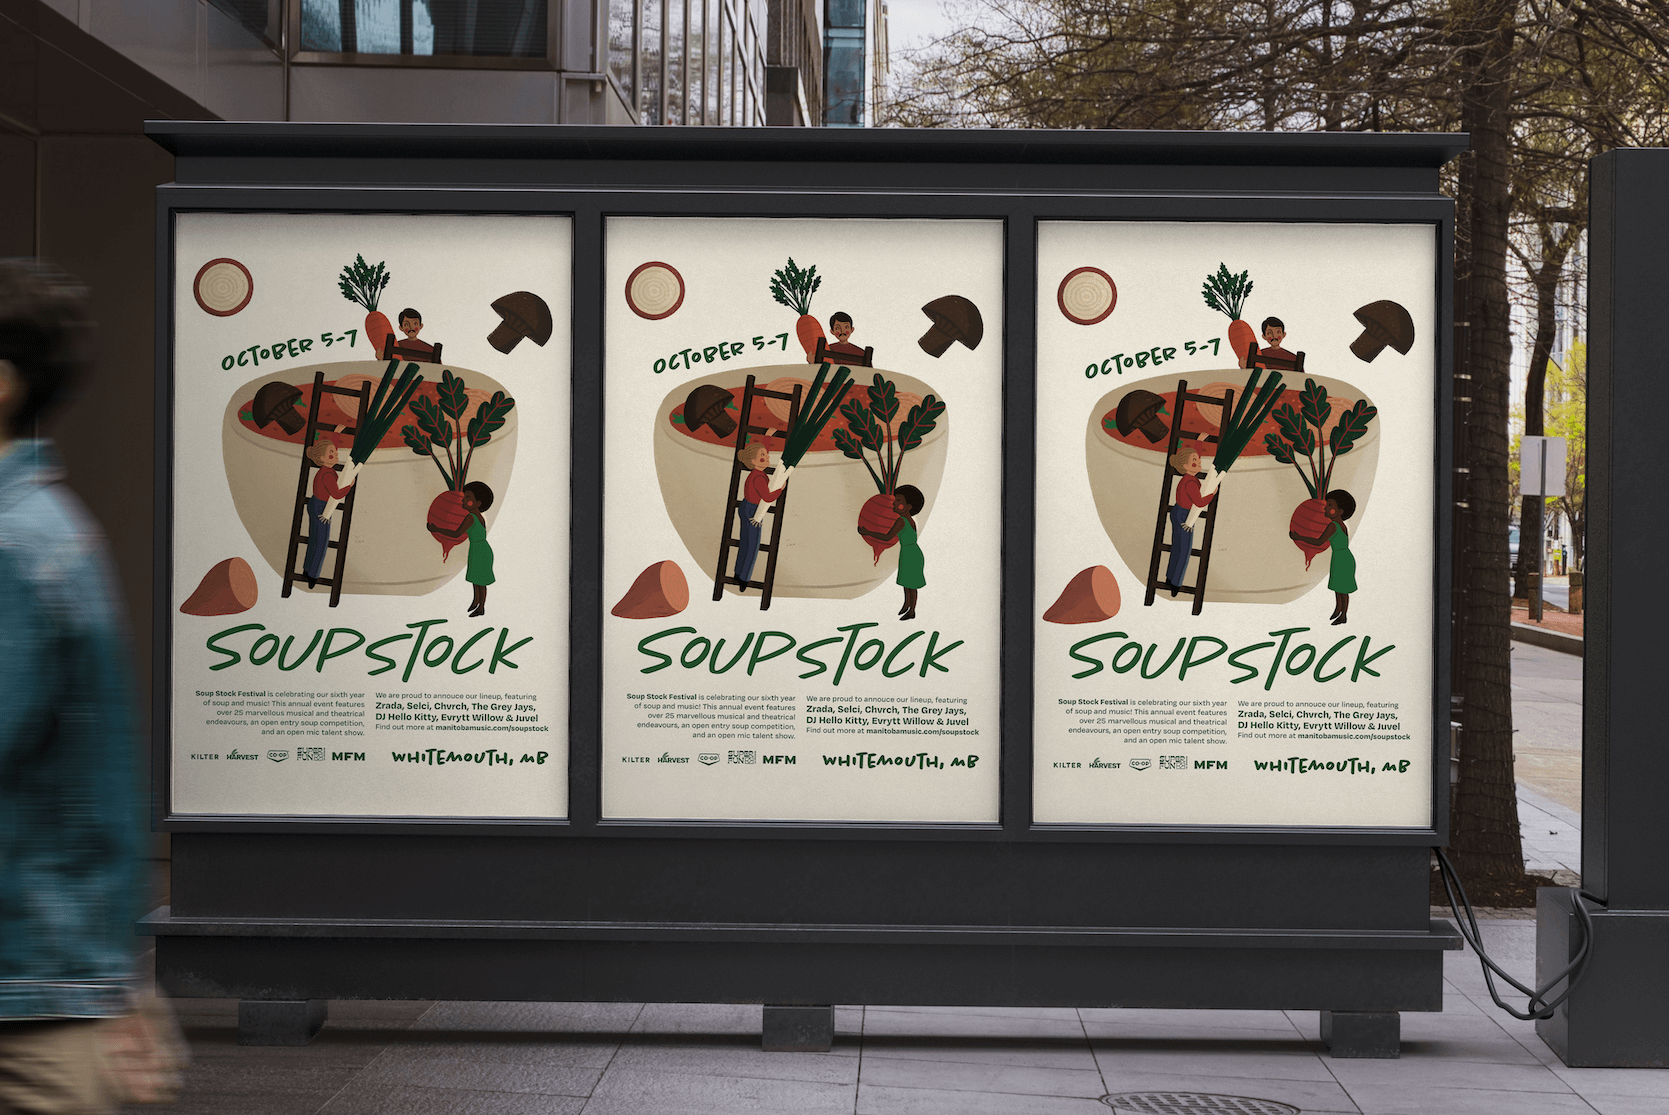 An image of Soupstock posters posted in an outdoor area